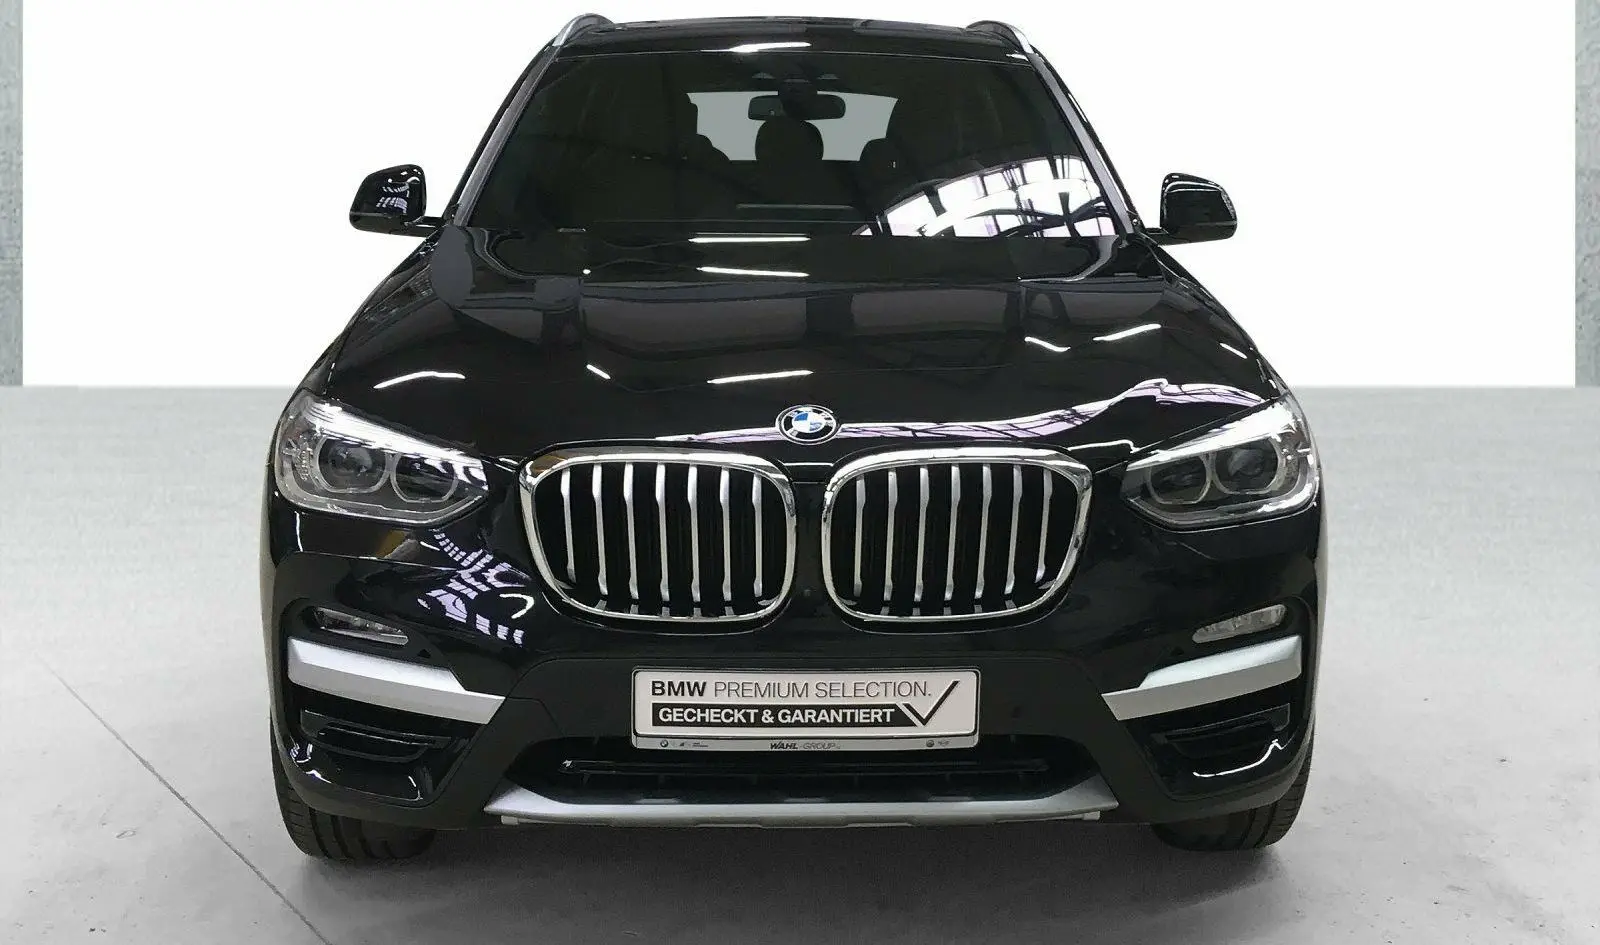 
Good Quality At Cheap Used Car Price SUV / Off-road Vehicle / Pickup Truck BMW X3 Second Car Used Used Cars And Their Prices 